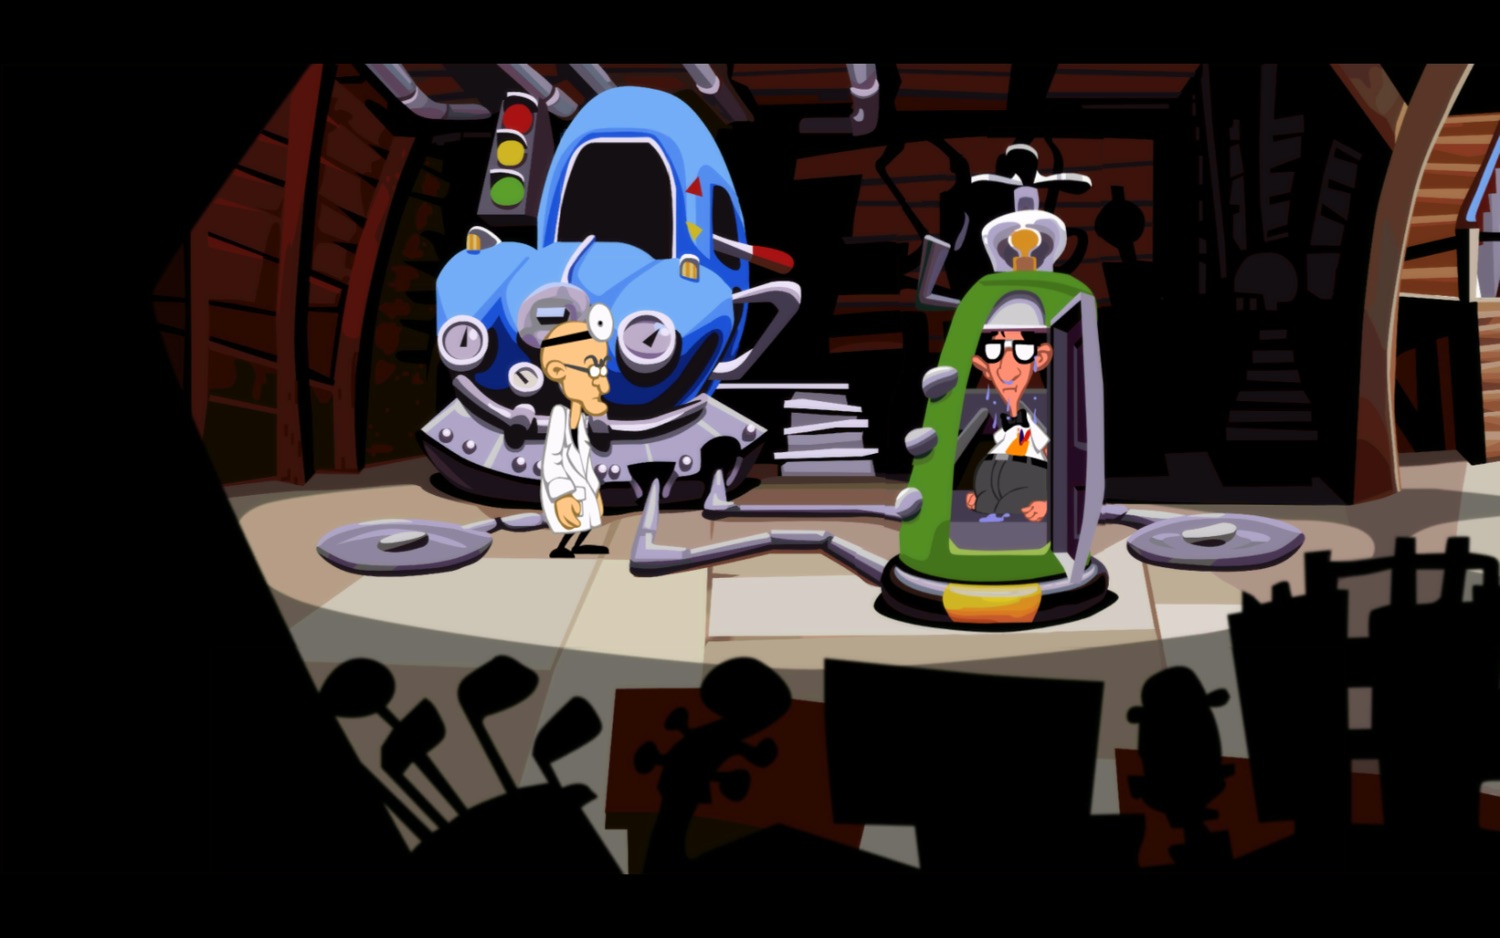 Screenshot of Dr Fred’s basement lab. The time machine is made out of an old car. Dr Fred is standing in front of it, looking at Bernard who is stepping out of the Chron-o-John looking a little bedazzled.